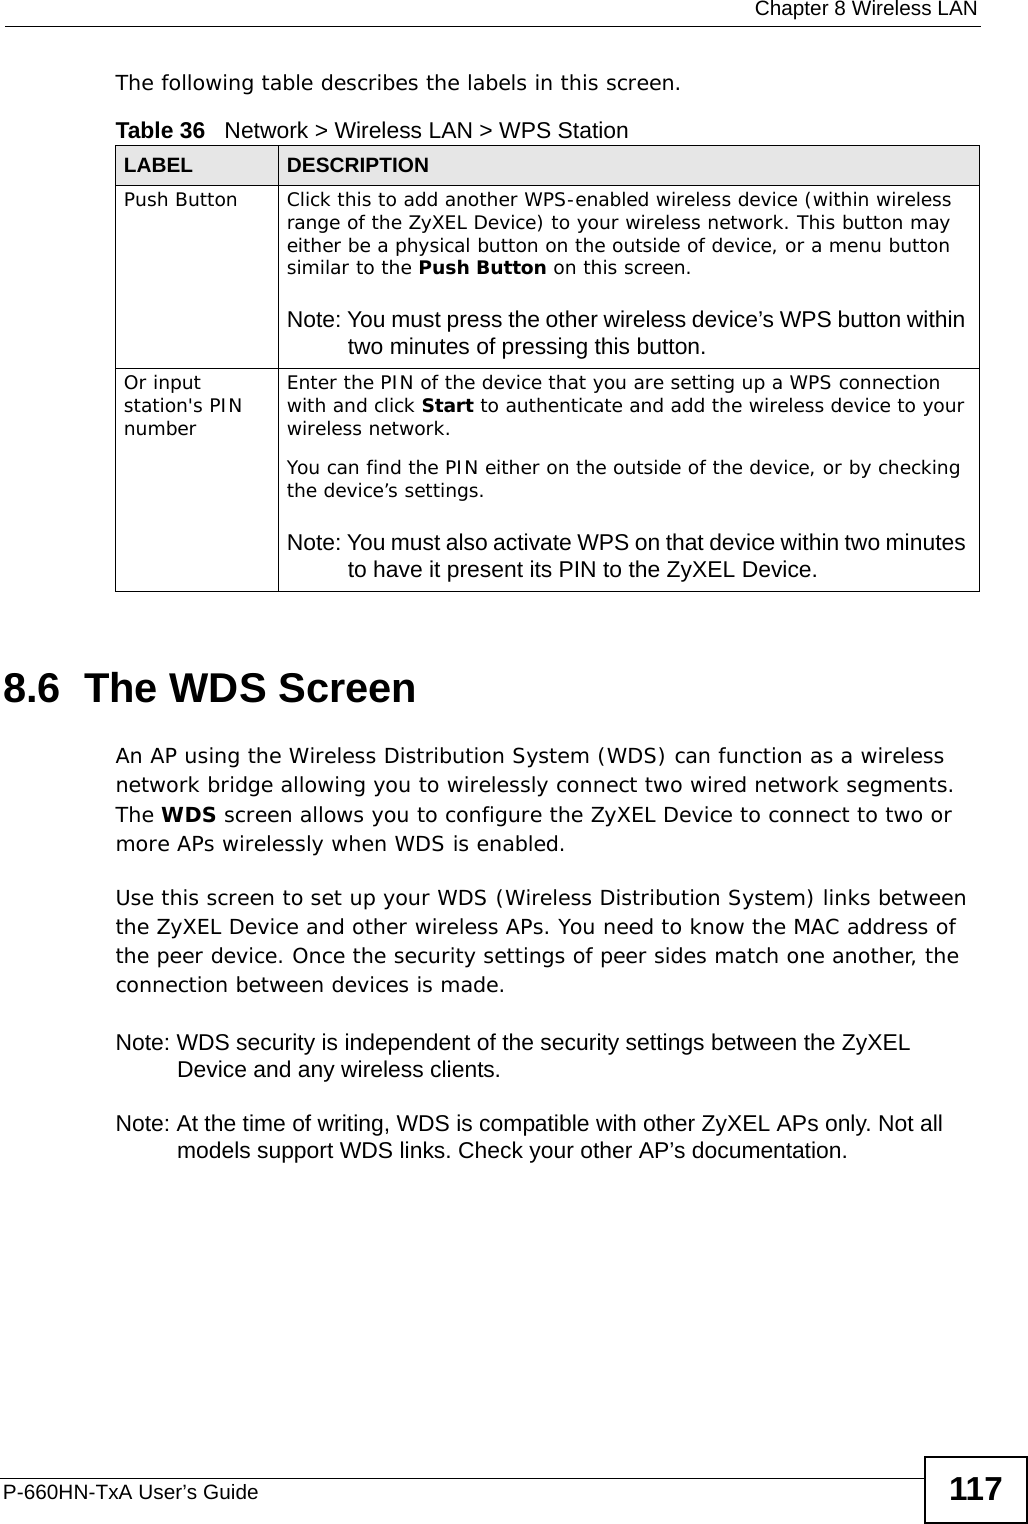  Chapter 8 Wireless LANP-660HN-TxA User’s Guide 117The following table describes the labels in this screen.8.6  The WDS ScreenAn AP using the Wireless Distribution System (WDS) can function as a wireless network bridge allowing you to wirelessly connect two wired network segments. The WDS screen allows you to configure the ZyXEL Device to connect to two or more APs wirelessly when WDS is enabled. Use this screen to set up your WDS (Wireless Distribution System) links between the ZyXEL Device and other wireless APs. You need to know the MAC address of the peer device. Once the security settings of peer sides match one another, the connection between devices is made. Note: WDS security is independent of the security settings between the ZyXEL Device and any wireless clients.Note: At the time of writing, WDS is compatible with other ZyXEL APs only. Not all models support WDS links. Check your other AP’s documentation.Table 36   Network &gt; Wireless LAN &gt; WPS StationLABEL DESCRIPTIONPush Button Click this to add another WPS-enabled wireless device (within wireless range of the ZyXEL Device) to your wireless network. This button may either be a physical button on the outside of device, or a menu button similar to the Push Button on this screen.Note: You must press the other wireless device’s WPS button within two minutes of pressing this button.Or input station&apos;s PIN numberEnter the PIN of the device that you are setting up a WPS connection with and click Start to authenticate and add the wireless device to your wireless network.You can find the PIN either on the outside of the device, or by checking the device’s settings.Note: You must also activate WPS on that device within two minutes to have it present its PIN to the ZyXEL Device.